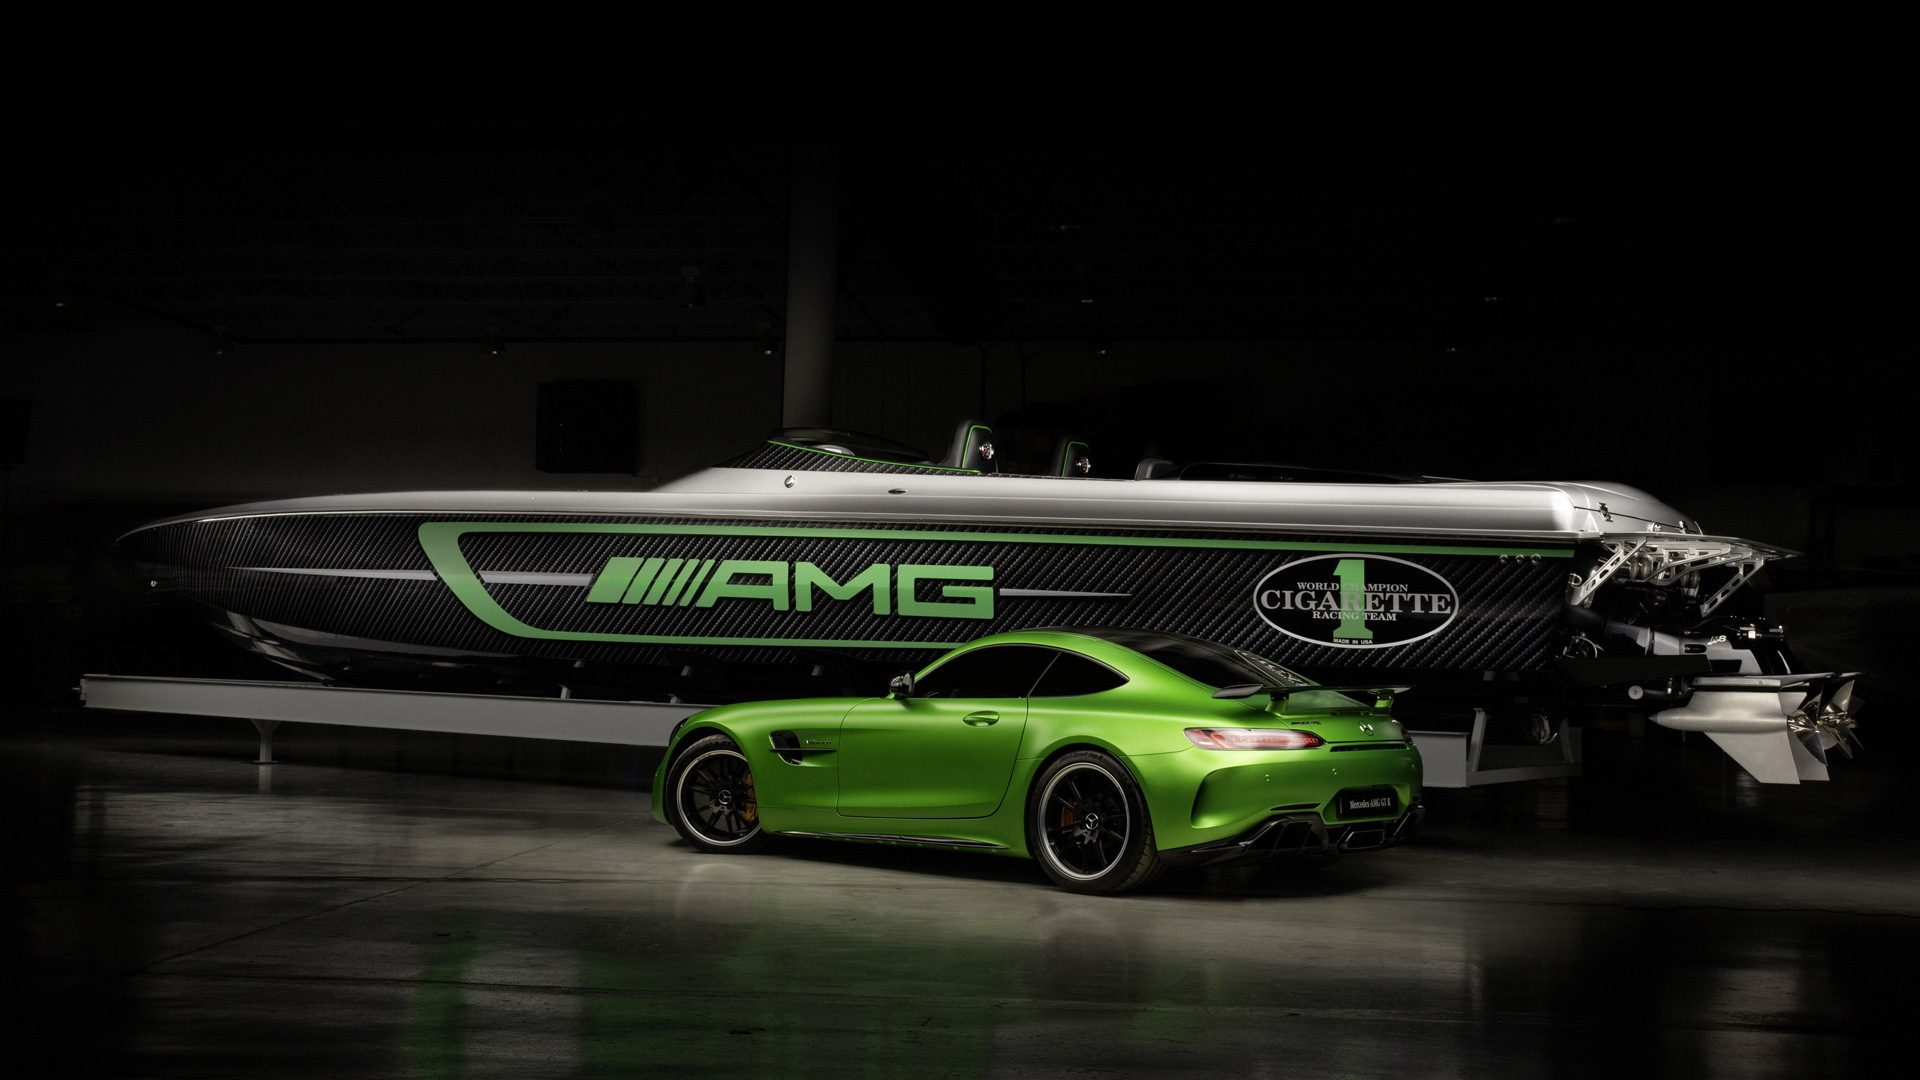 2017 Cigarette Racing 50’ Marauder AMG inspired by the 2018 Mercedes-AMG GT R